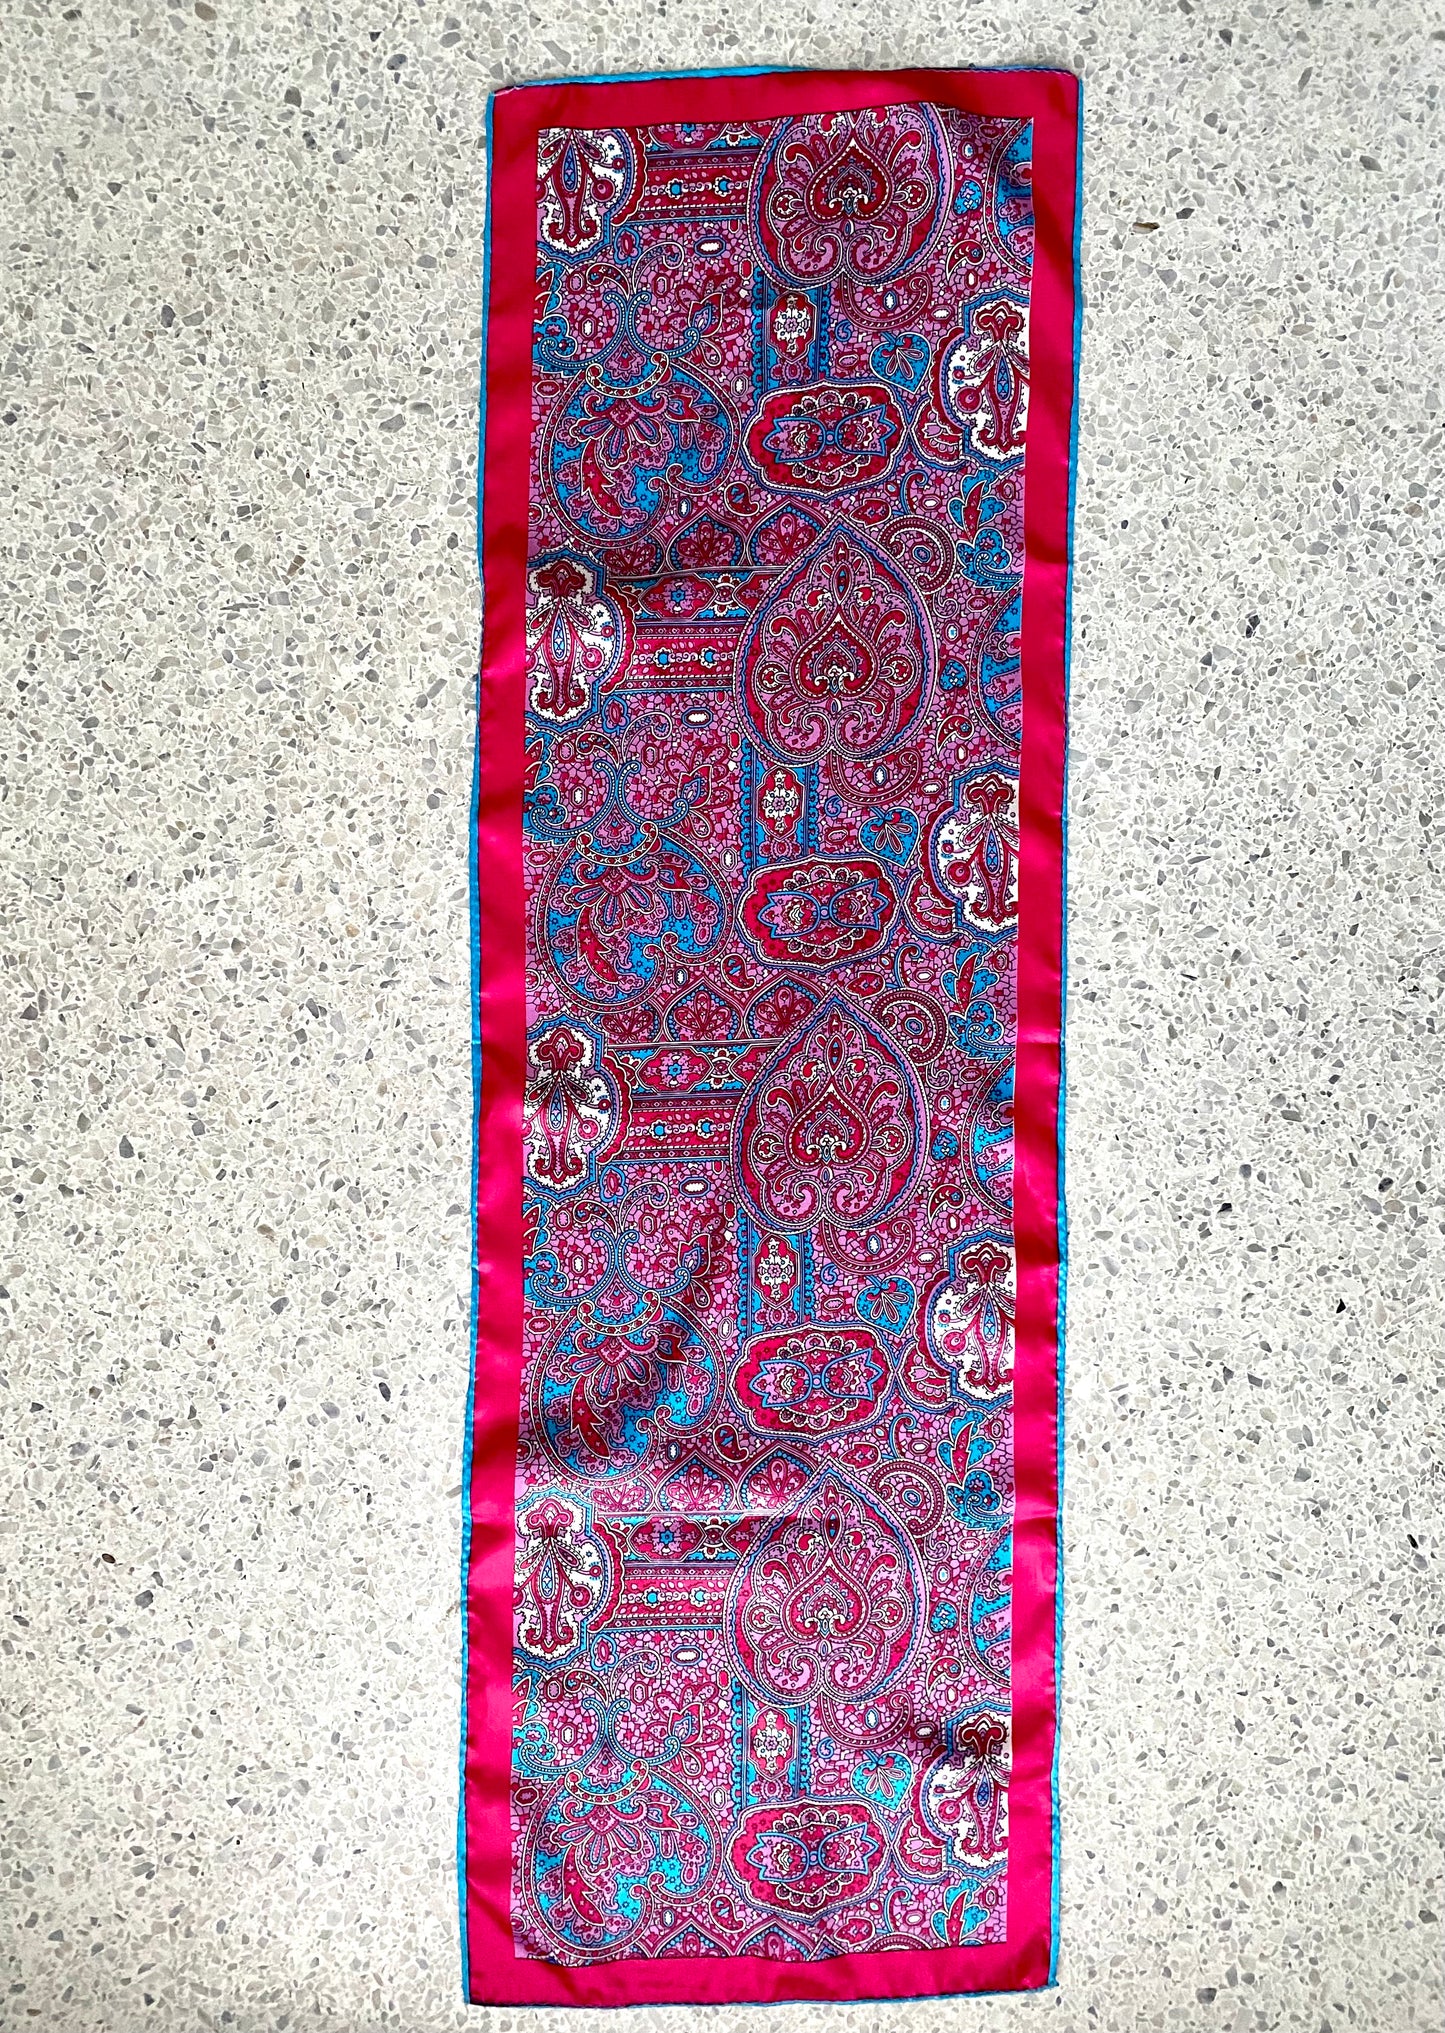 Late 60s/ Early 70s Bright Paisley Scarf